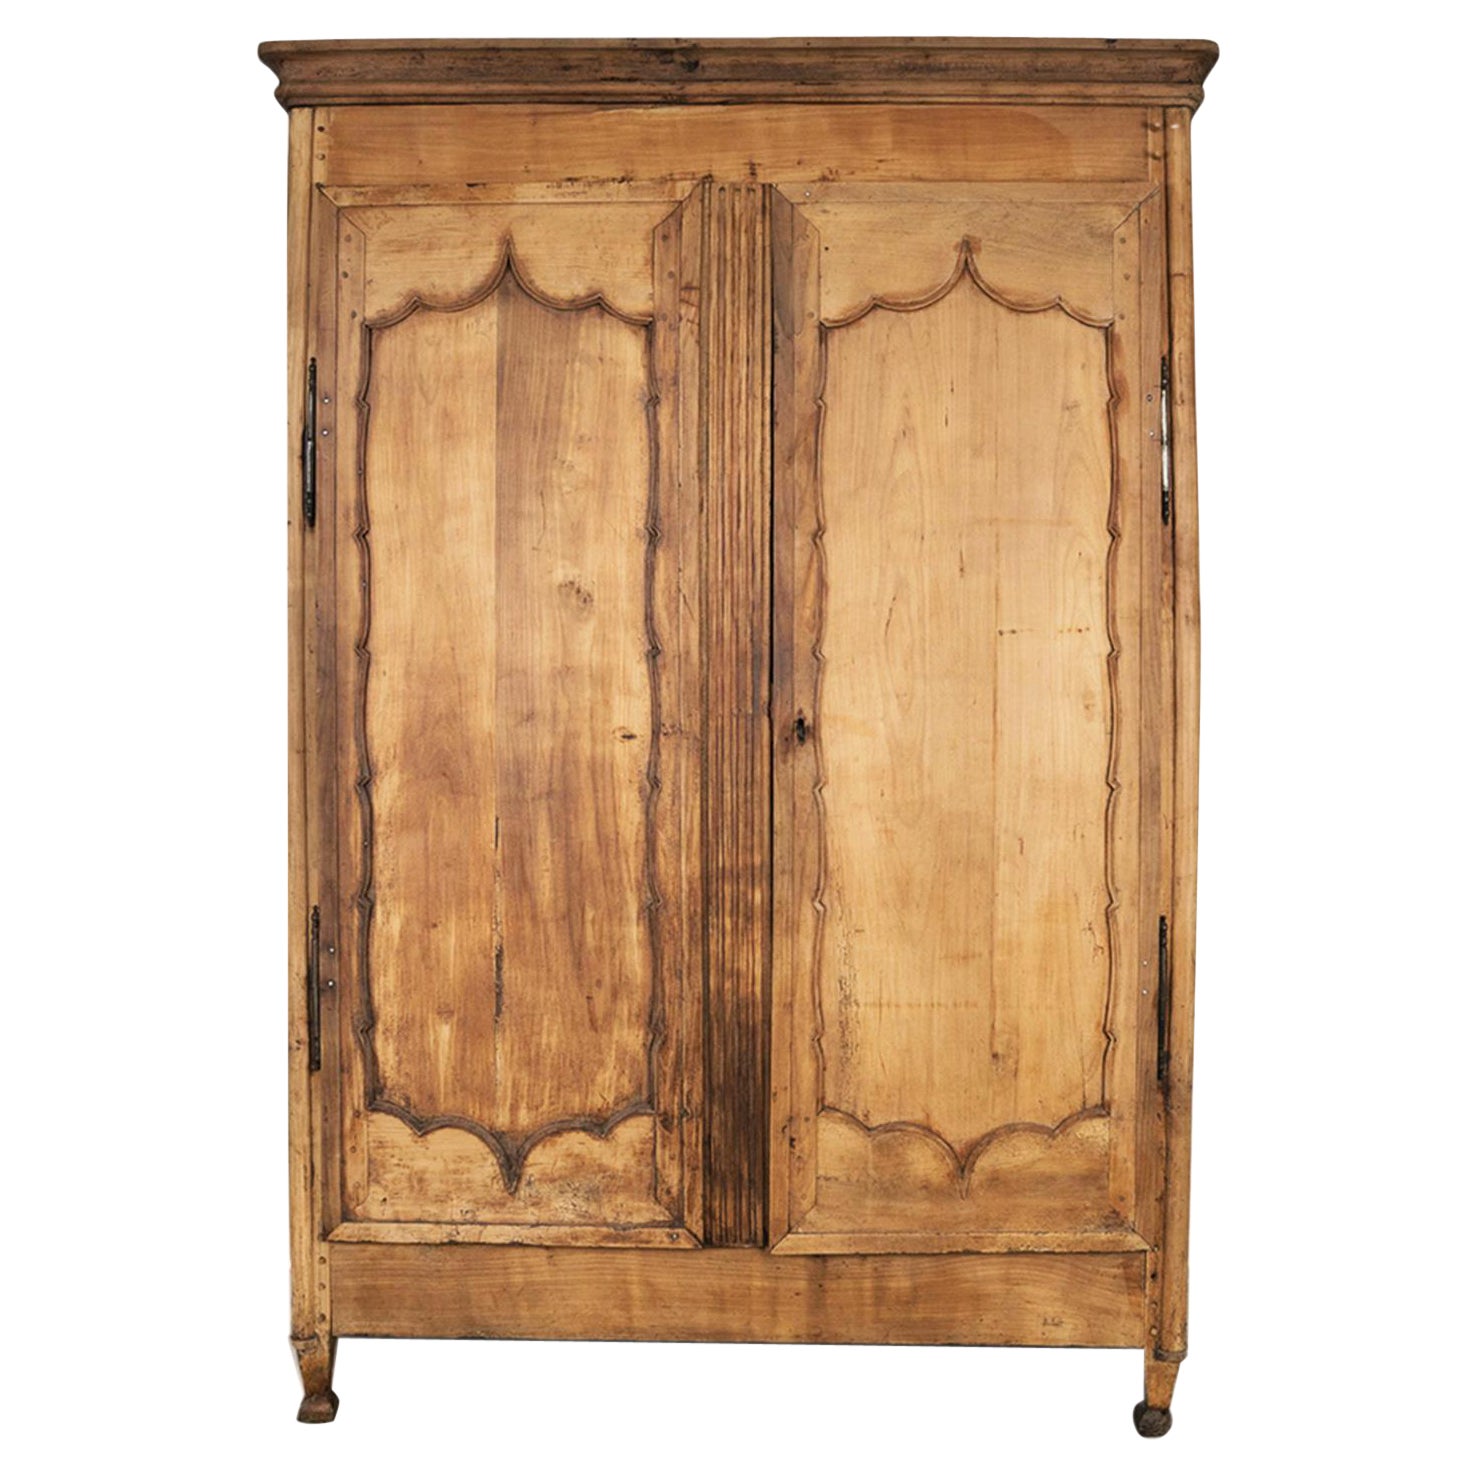 Antique French Rustic Country 19th C Hand Carved Fruitwood Armoire or Wardrobe For Sale